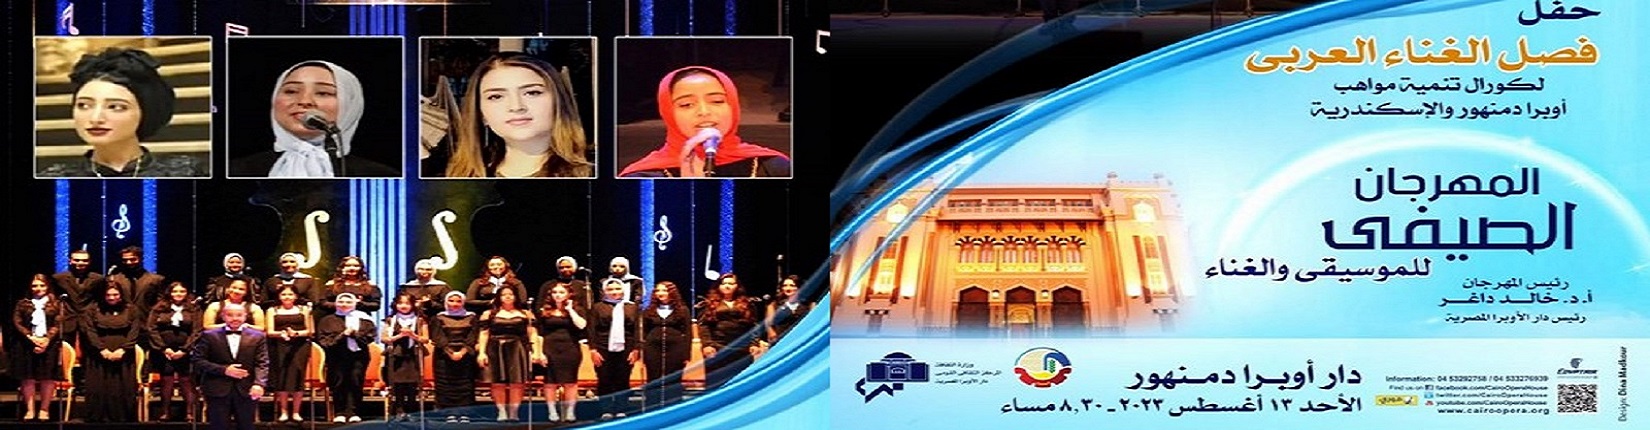 Alexandrian Talents Performing Classical and Modern Arab Songs